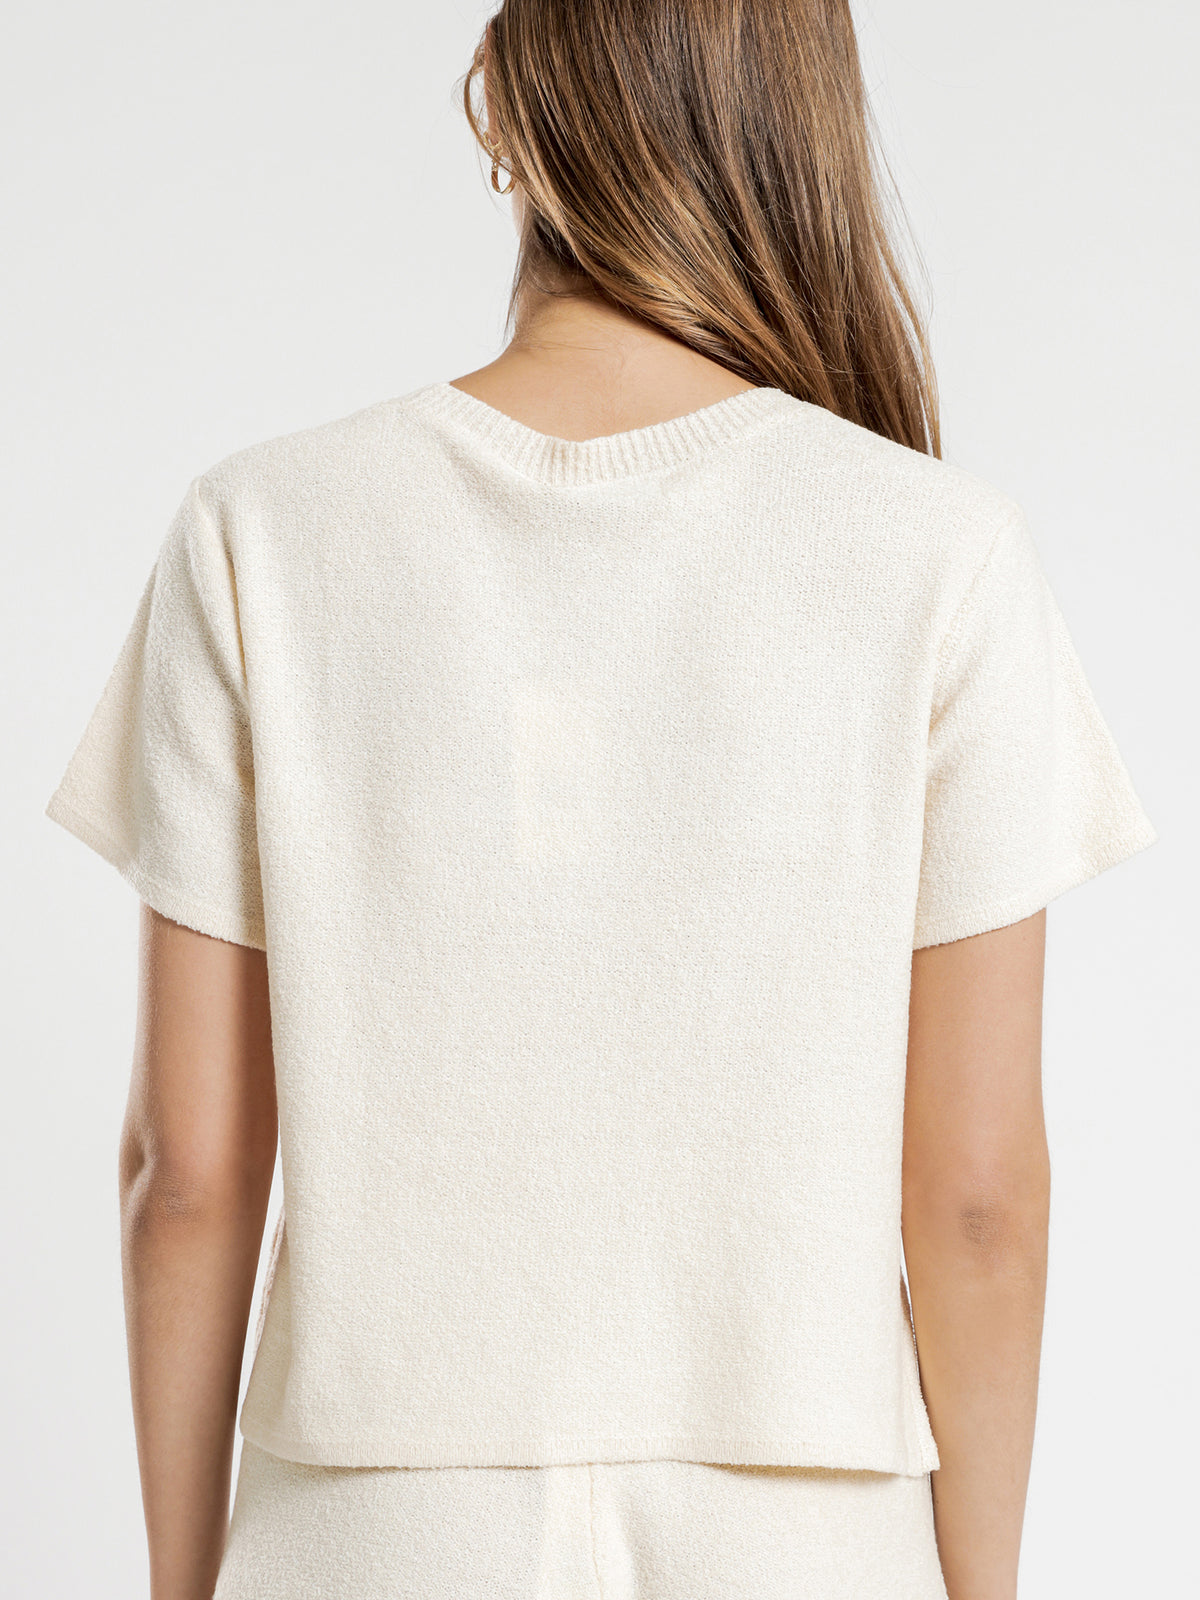 Coops Knitted T-Shirt in Creme